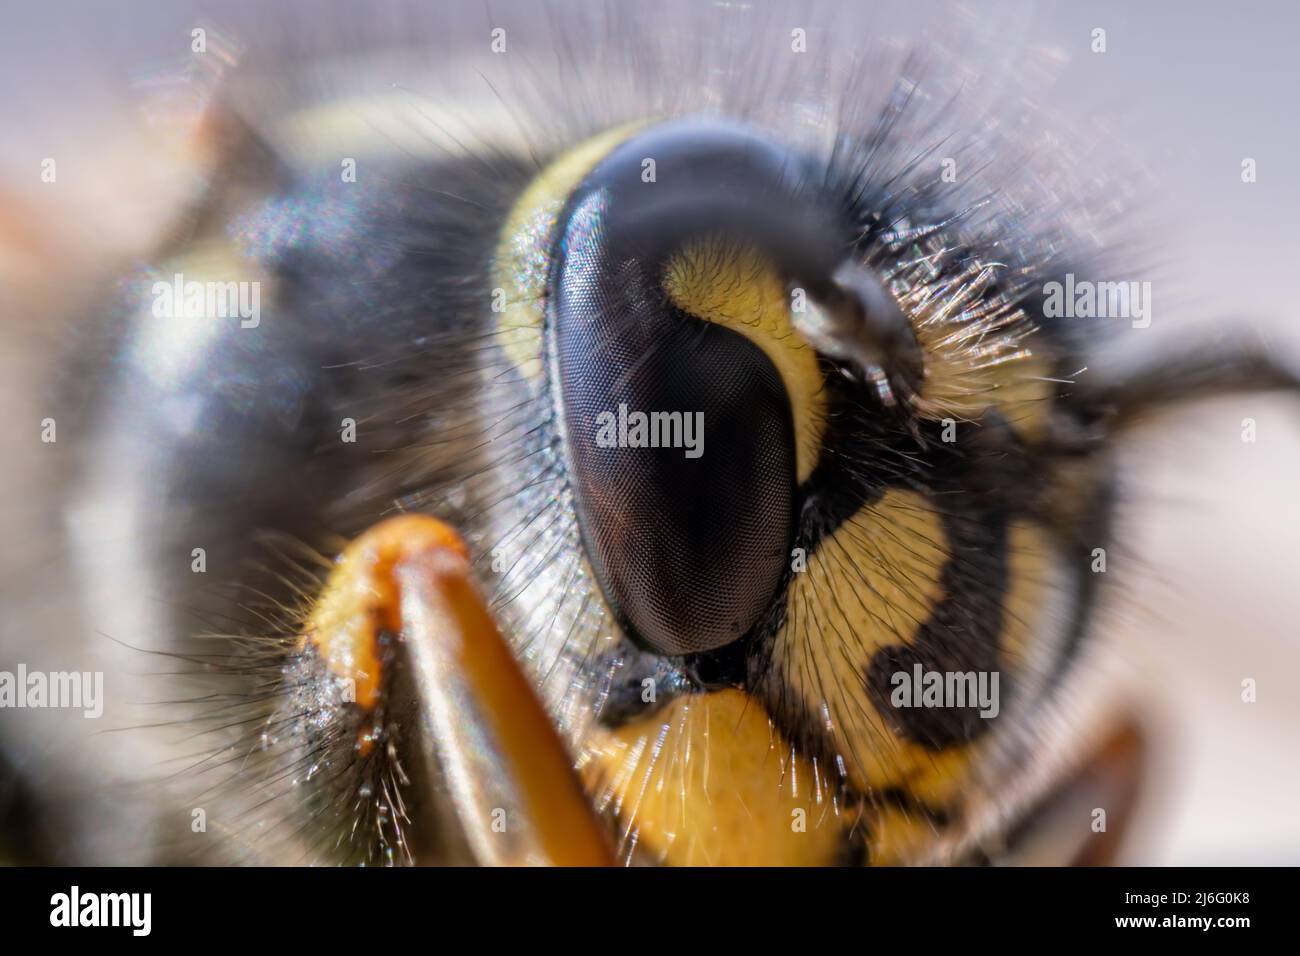 Super macro, extreme close up of a wasp. Stock Photo